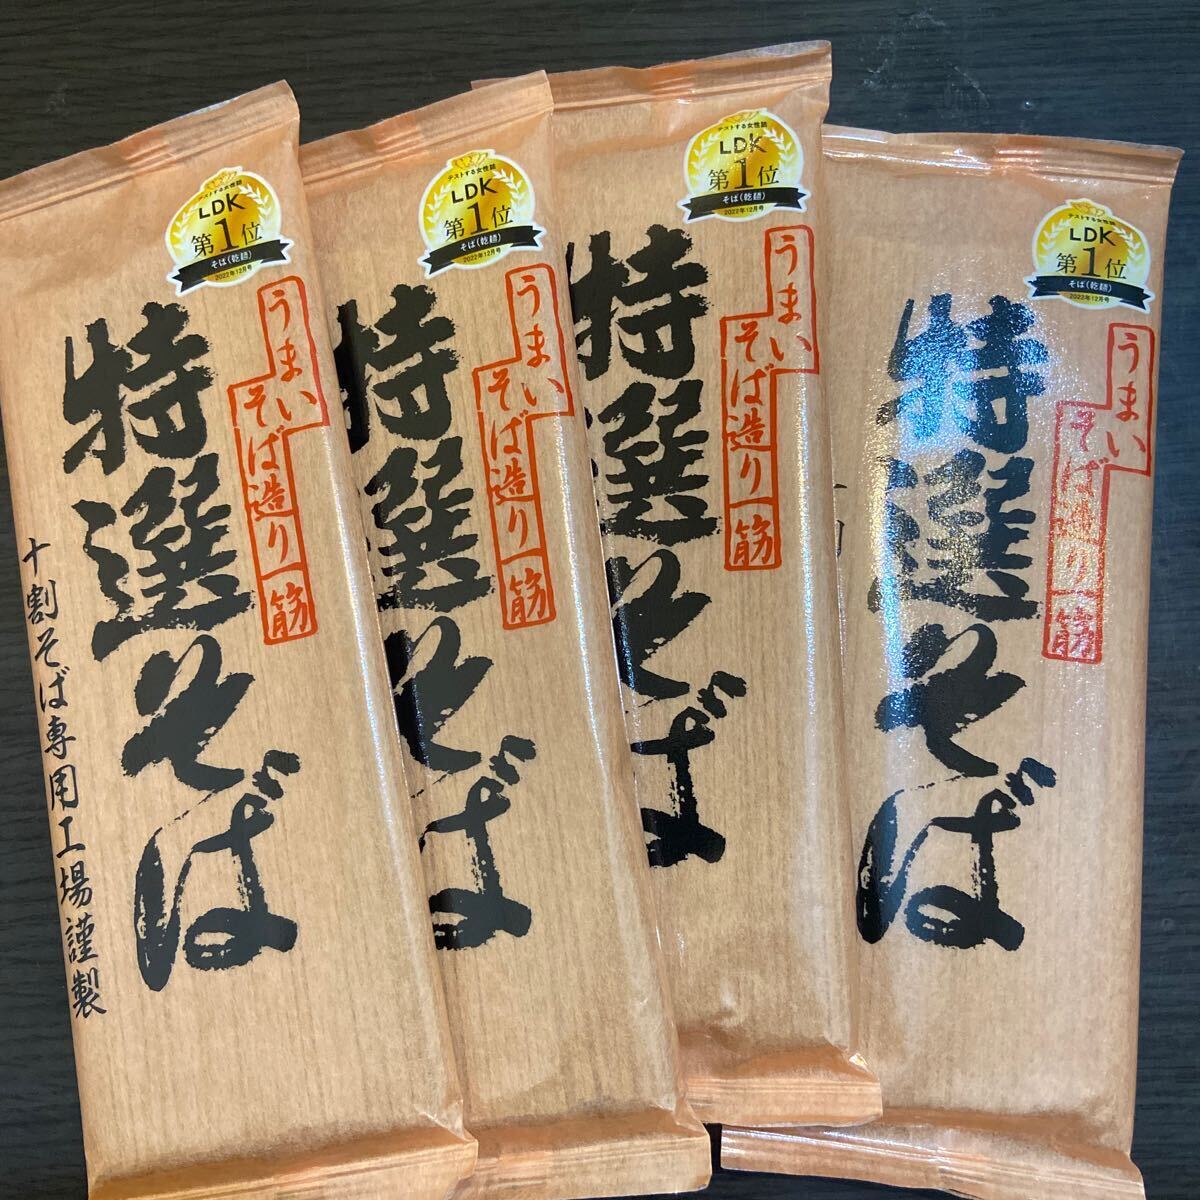  special selection soba 200g 4 piece set Yamamoto food LDK no. 1 rank dried soba buckwheat flour 10 break up soba exclusive use factory Nagano prefecture Yamamoto food special selection soba 10 break up soba exclusive use factory dried soba 